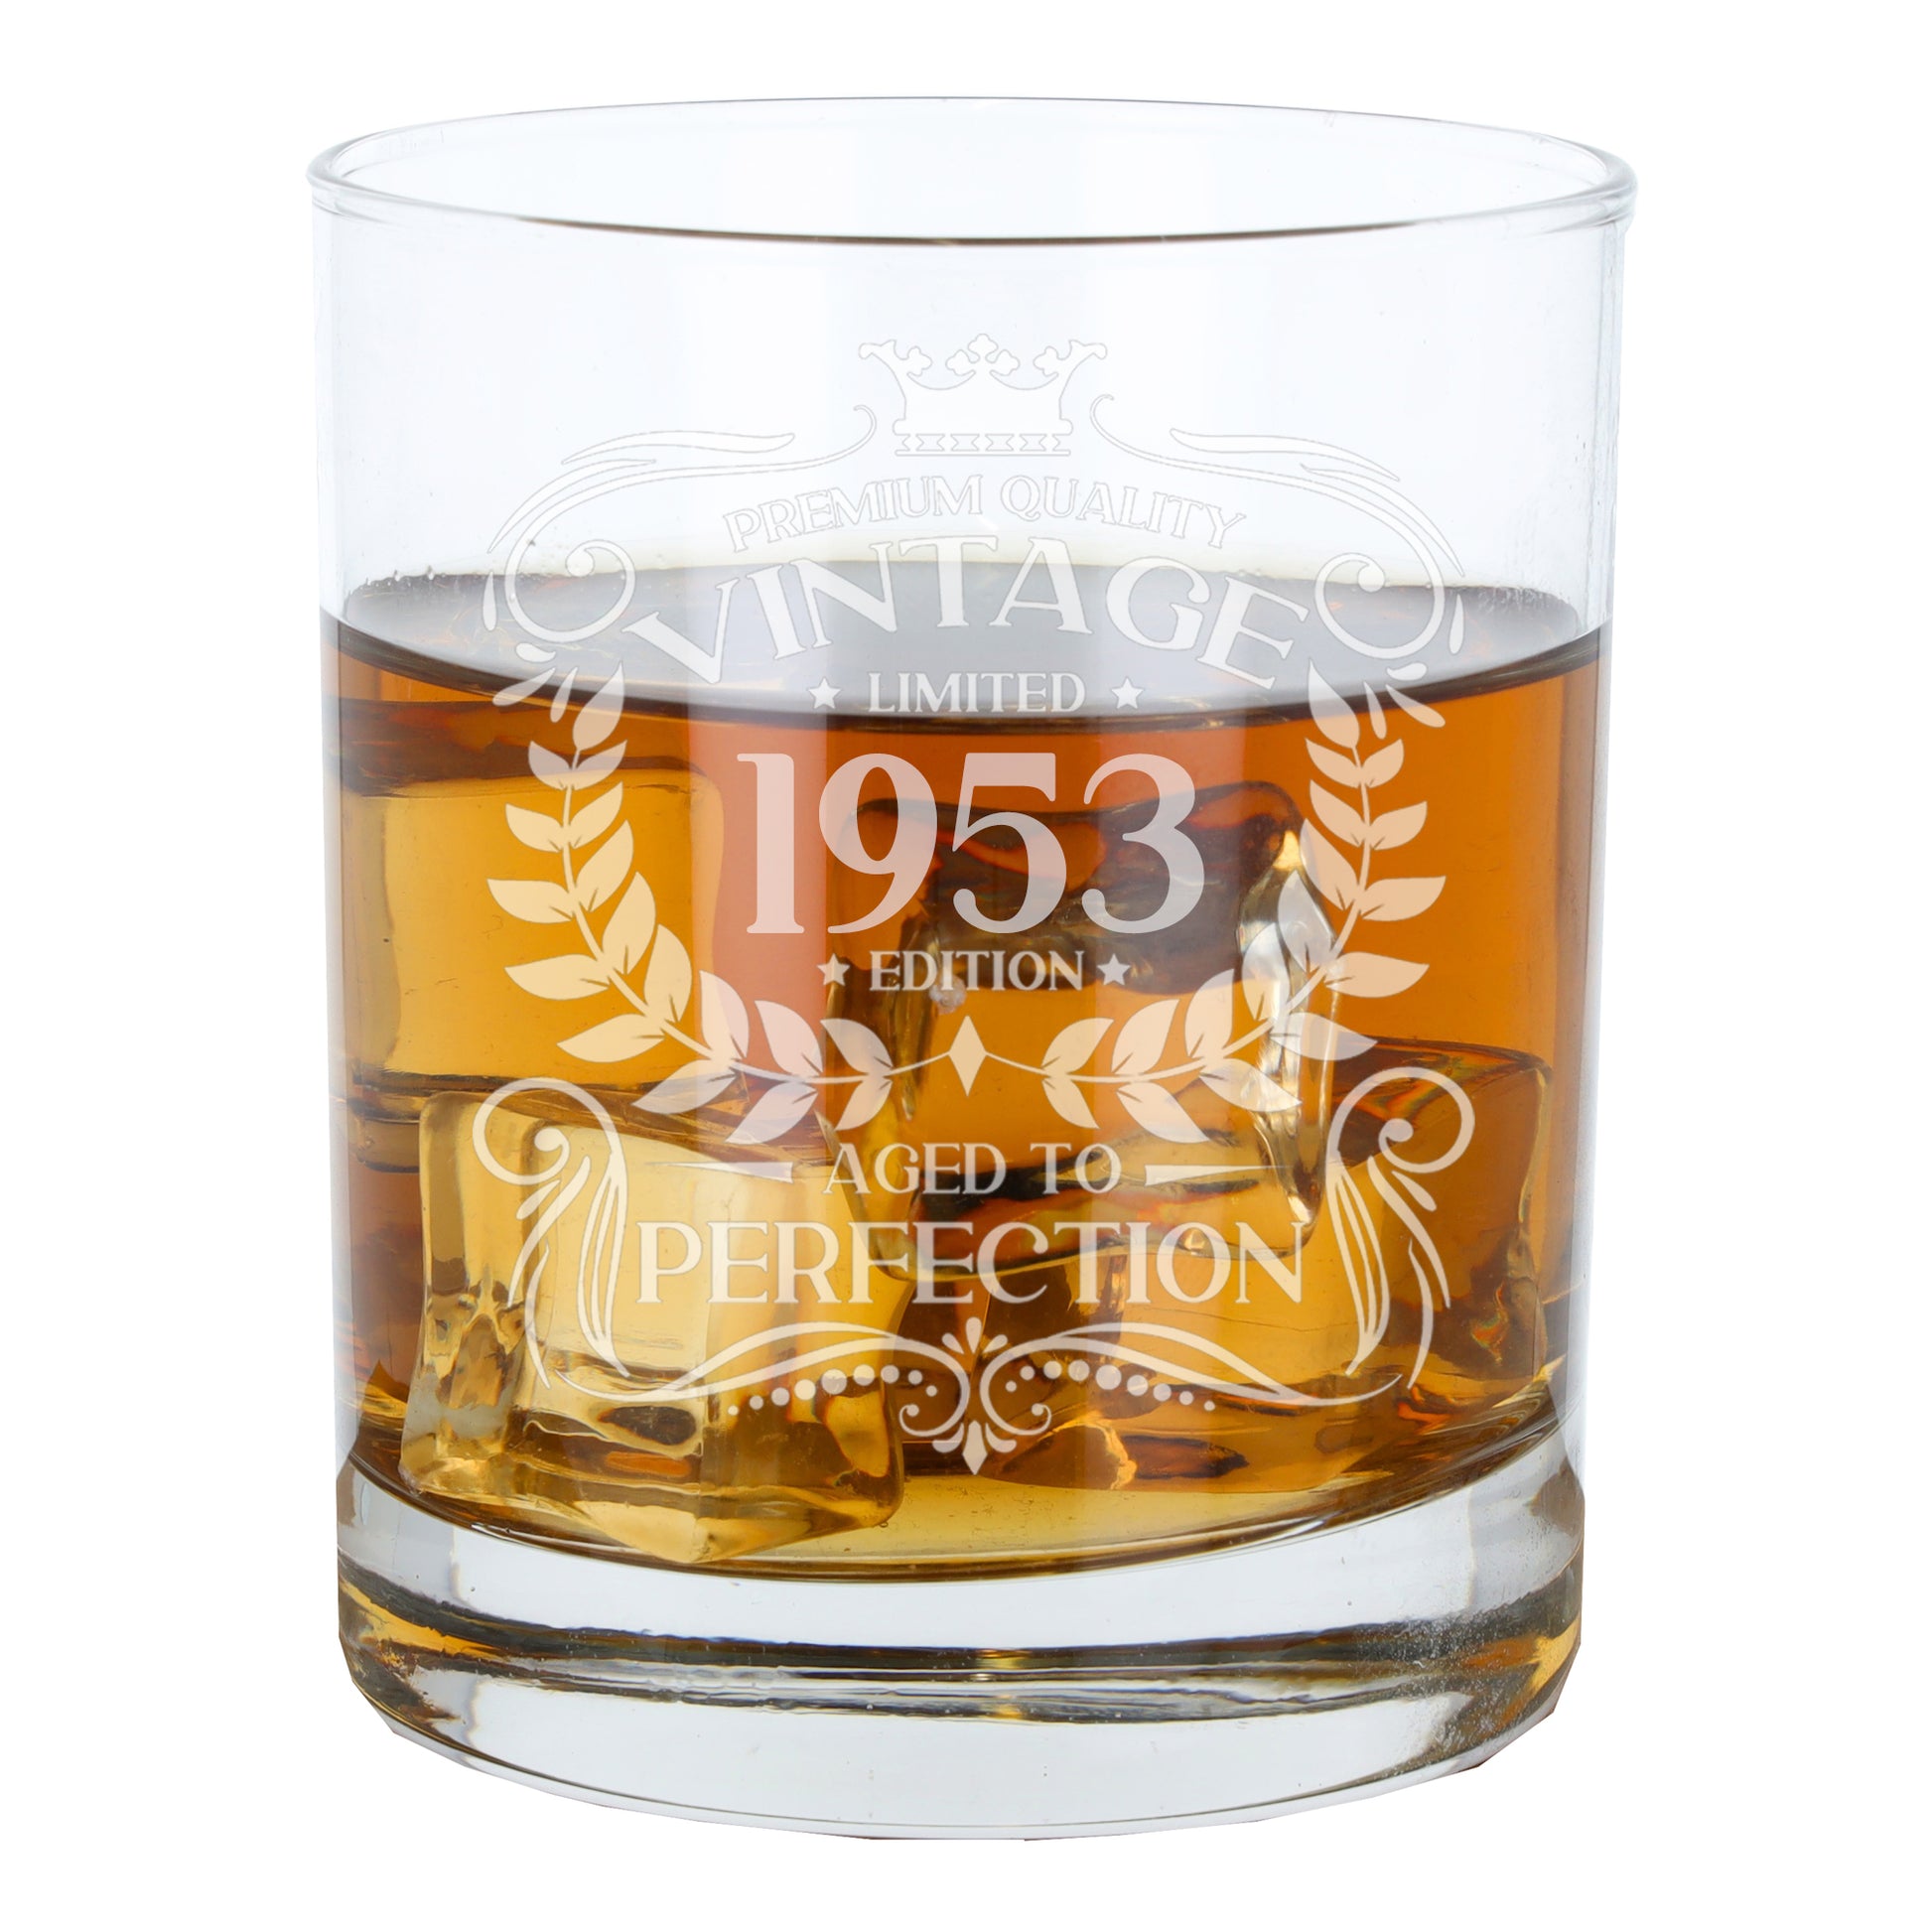 Vintage 1953 70th Birthday Engraved Whiskey Glass Gift  - Always Looking Good -   